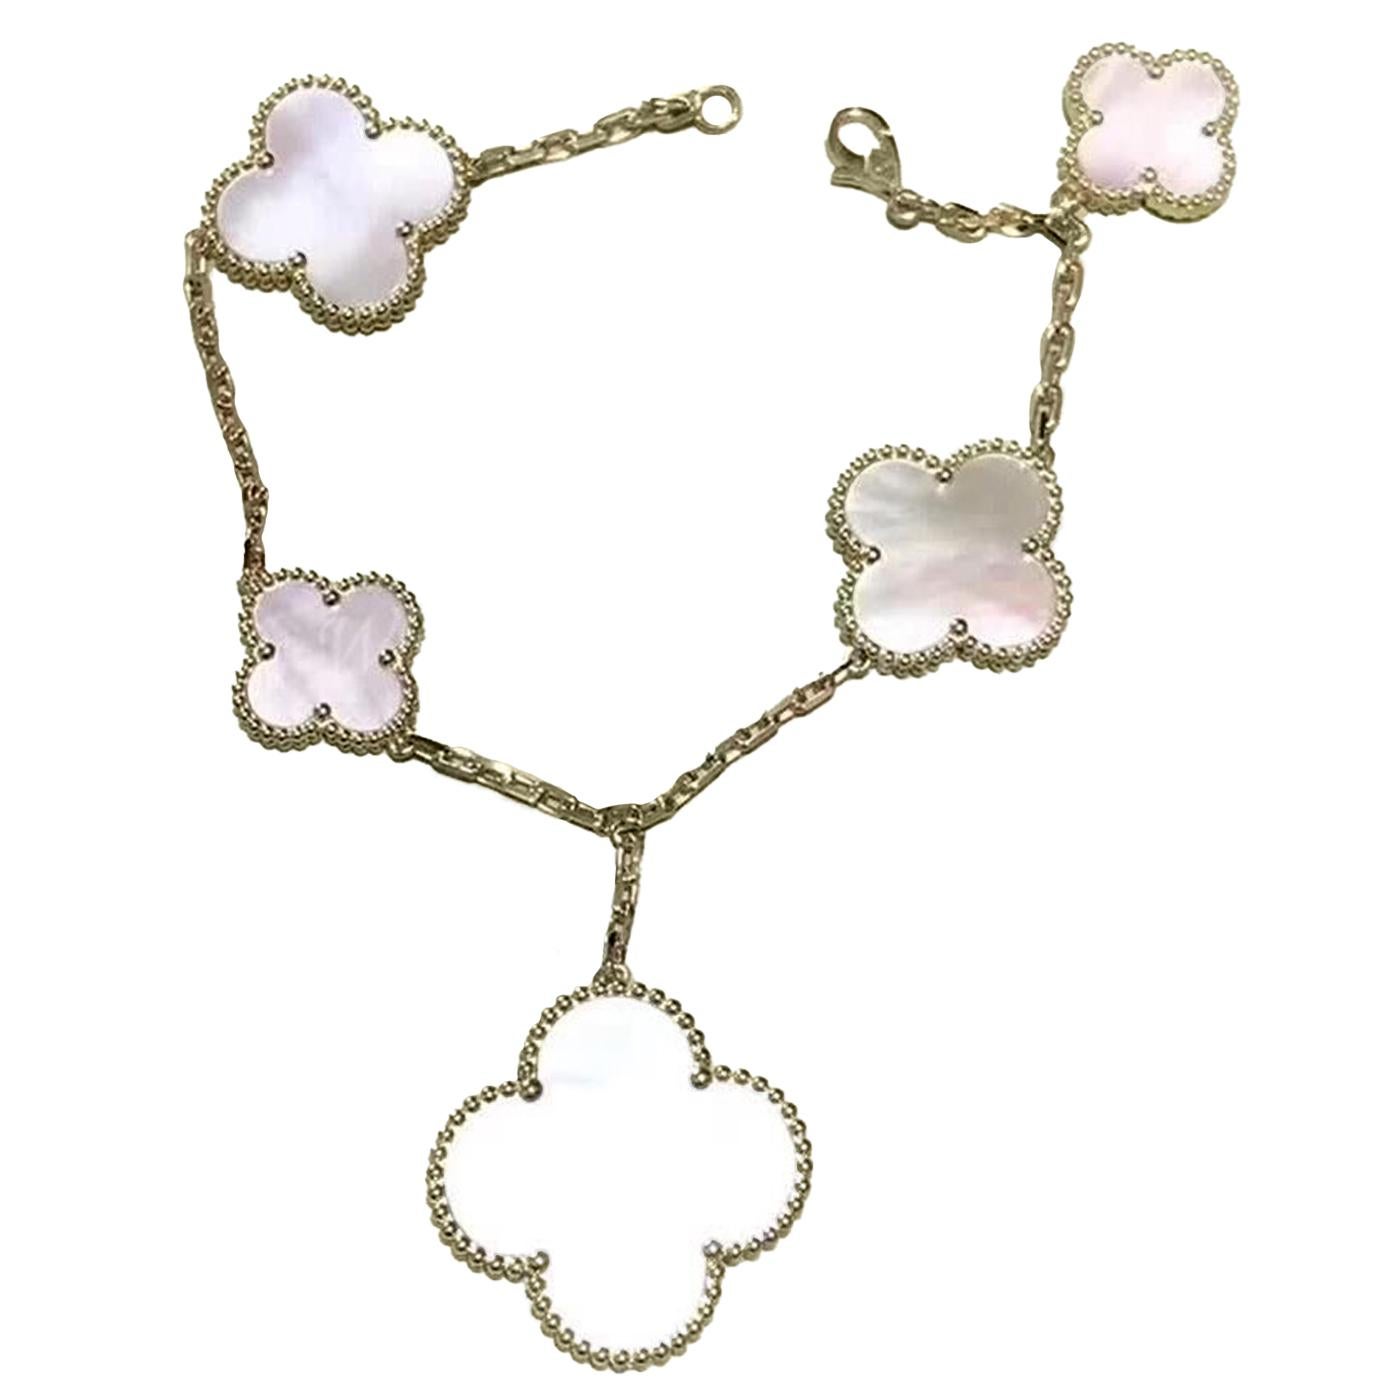 A wonderful Magic Alhambra MOP (Mother of Pearl) Bracelet by Van Cleef & Arpels. In wonderful condition with Original soft Case, pouch, and certificate from Van Cleef & Arpels, Harrods. Each quatrefoil is set with a perfect disc of MOP. Signed VCA,